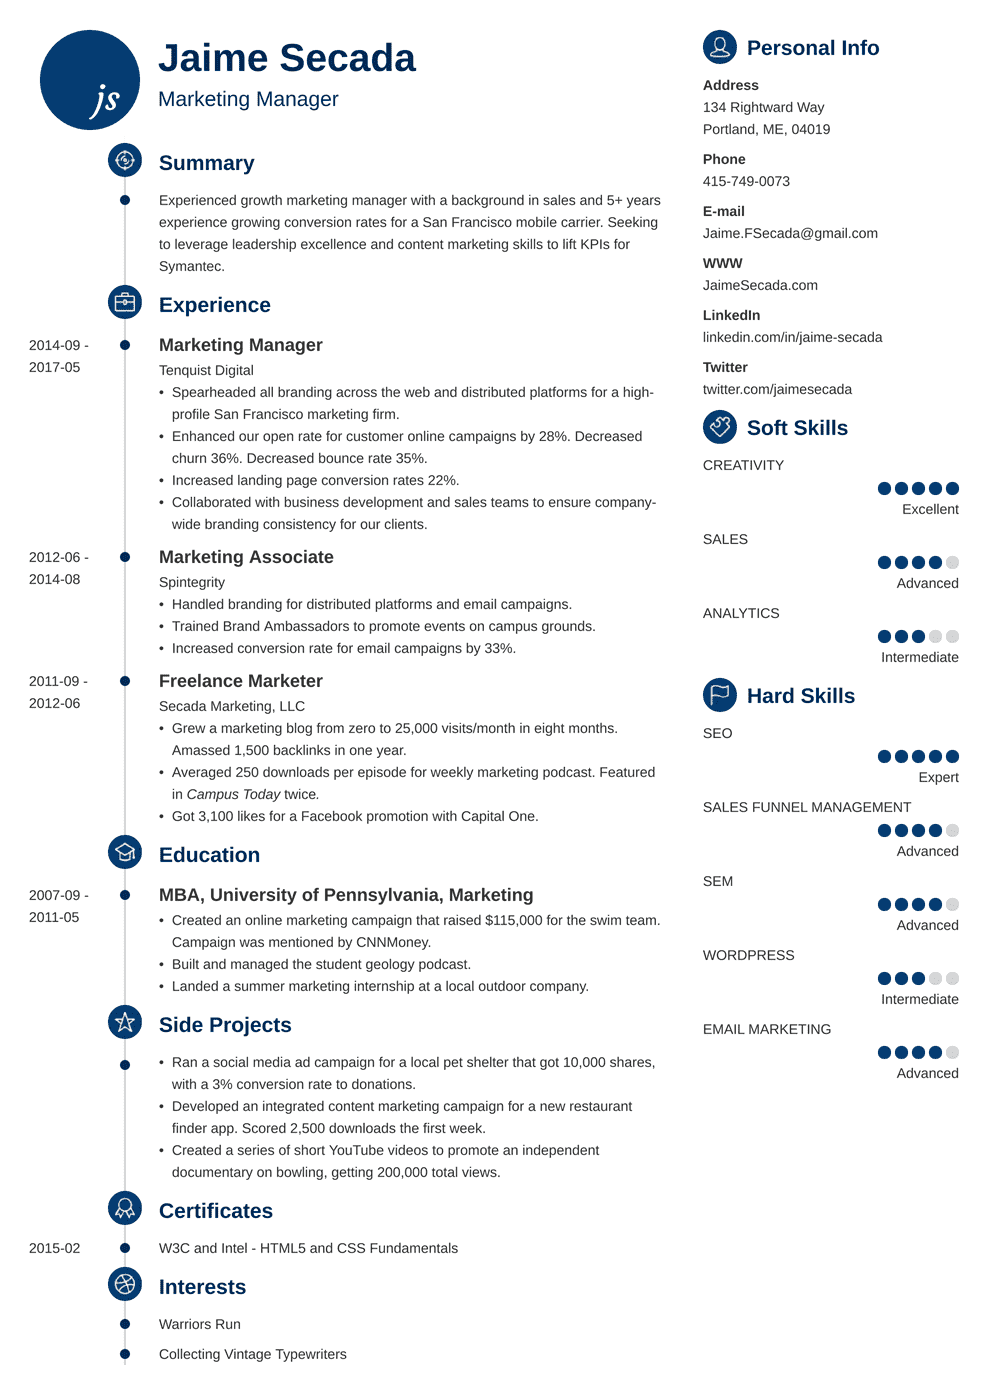 Best Resume Format For Marketing Manager Regardless of your